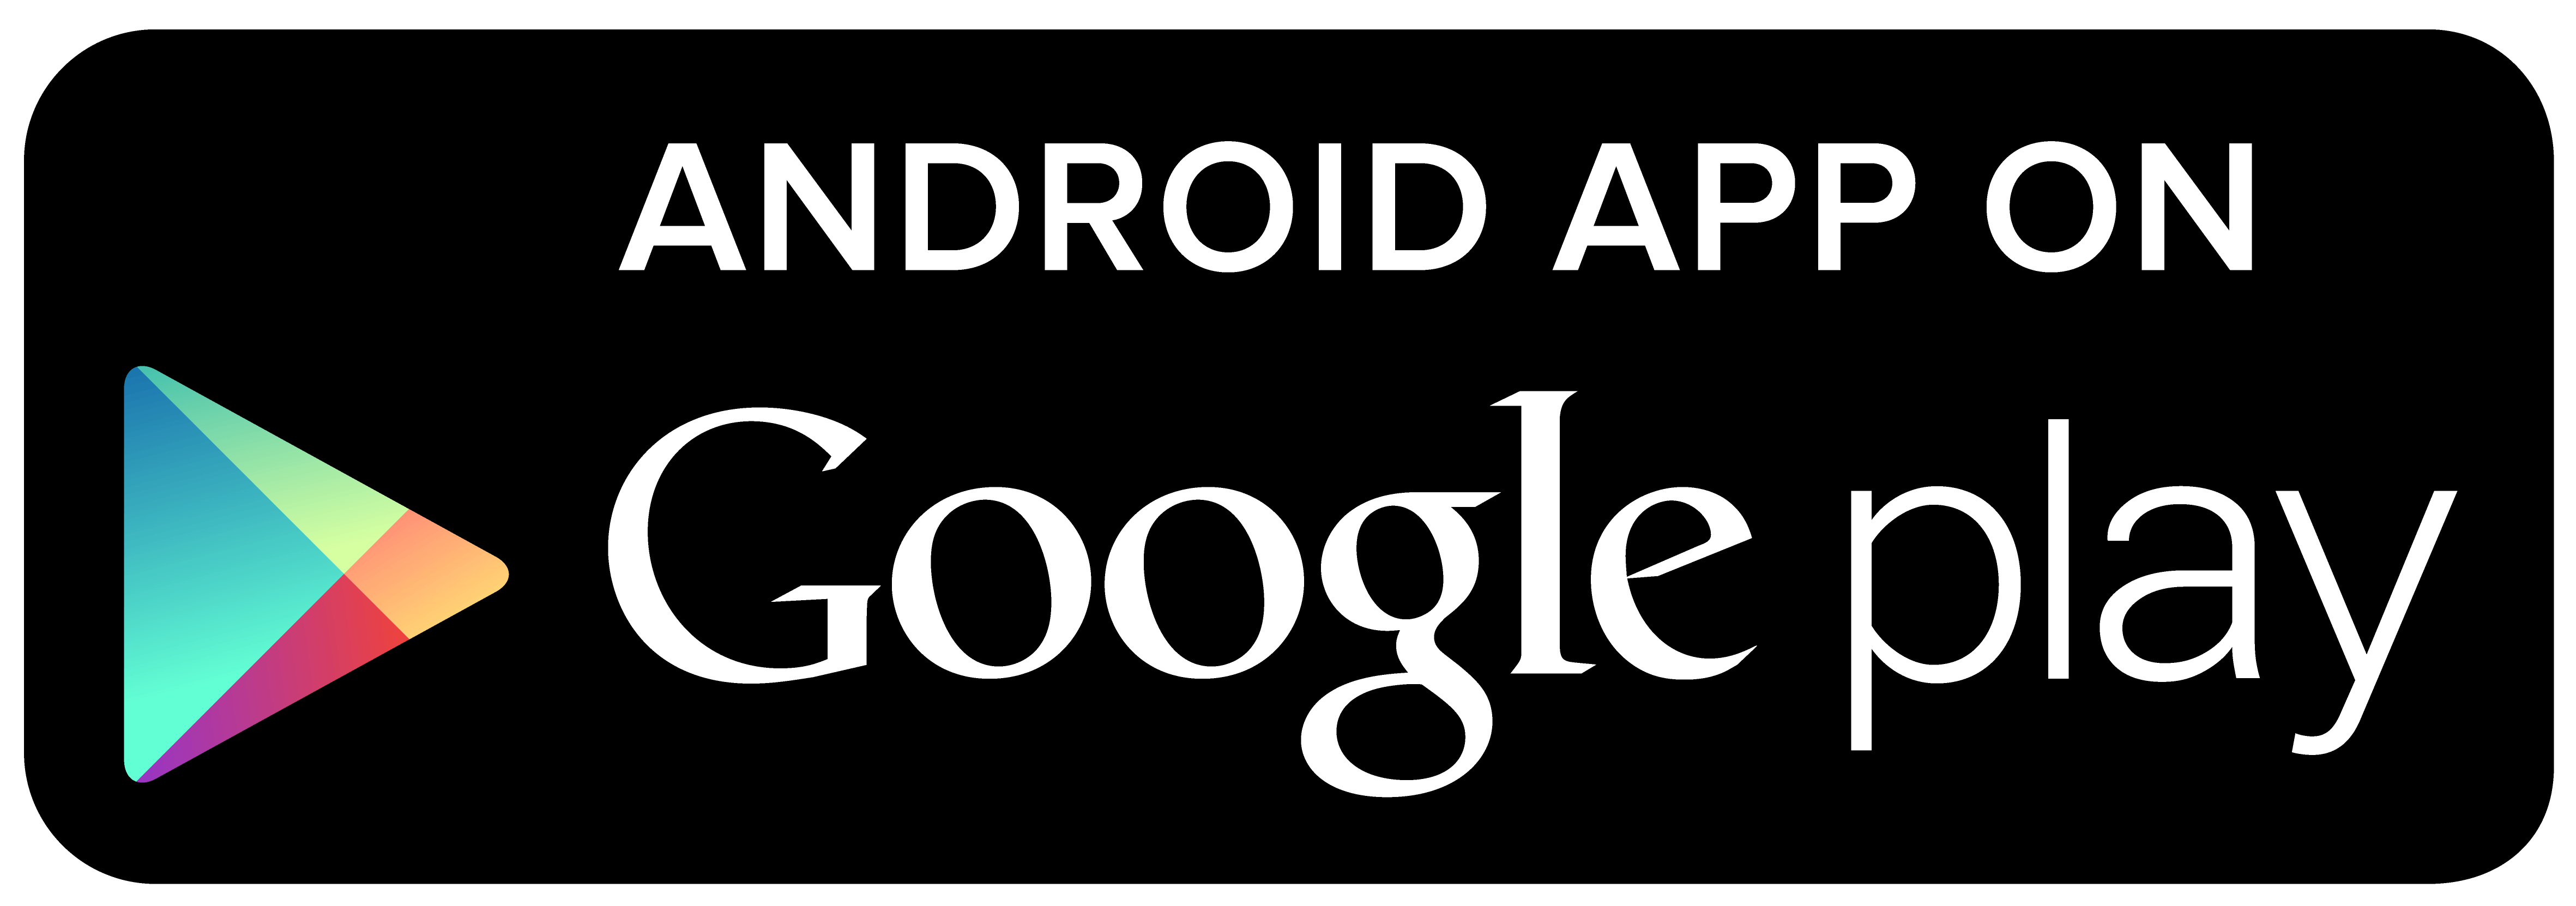 Android Play Store Logo - Play Store Logo Png (93+ images in Collection) Page 1